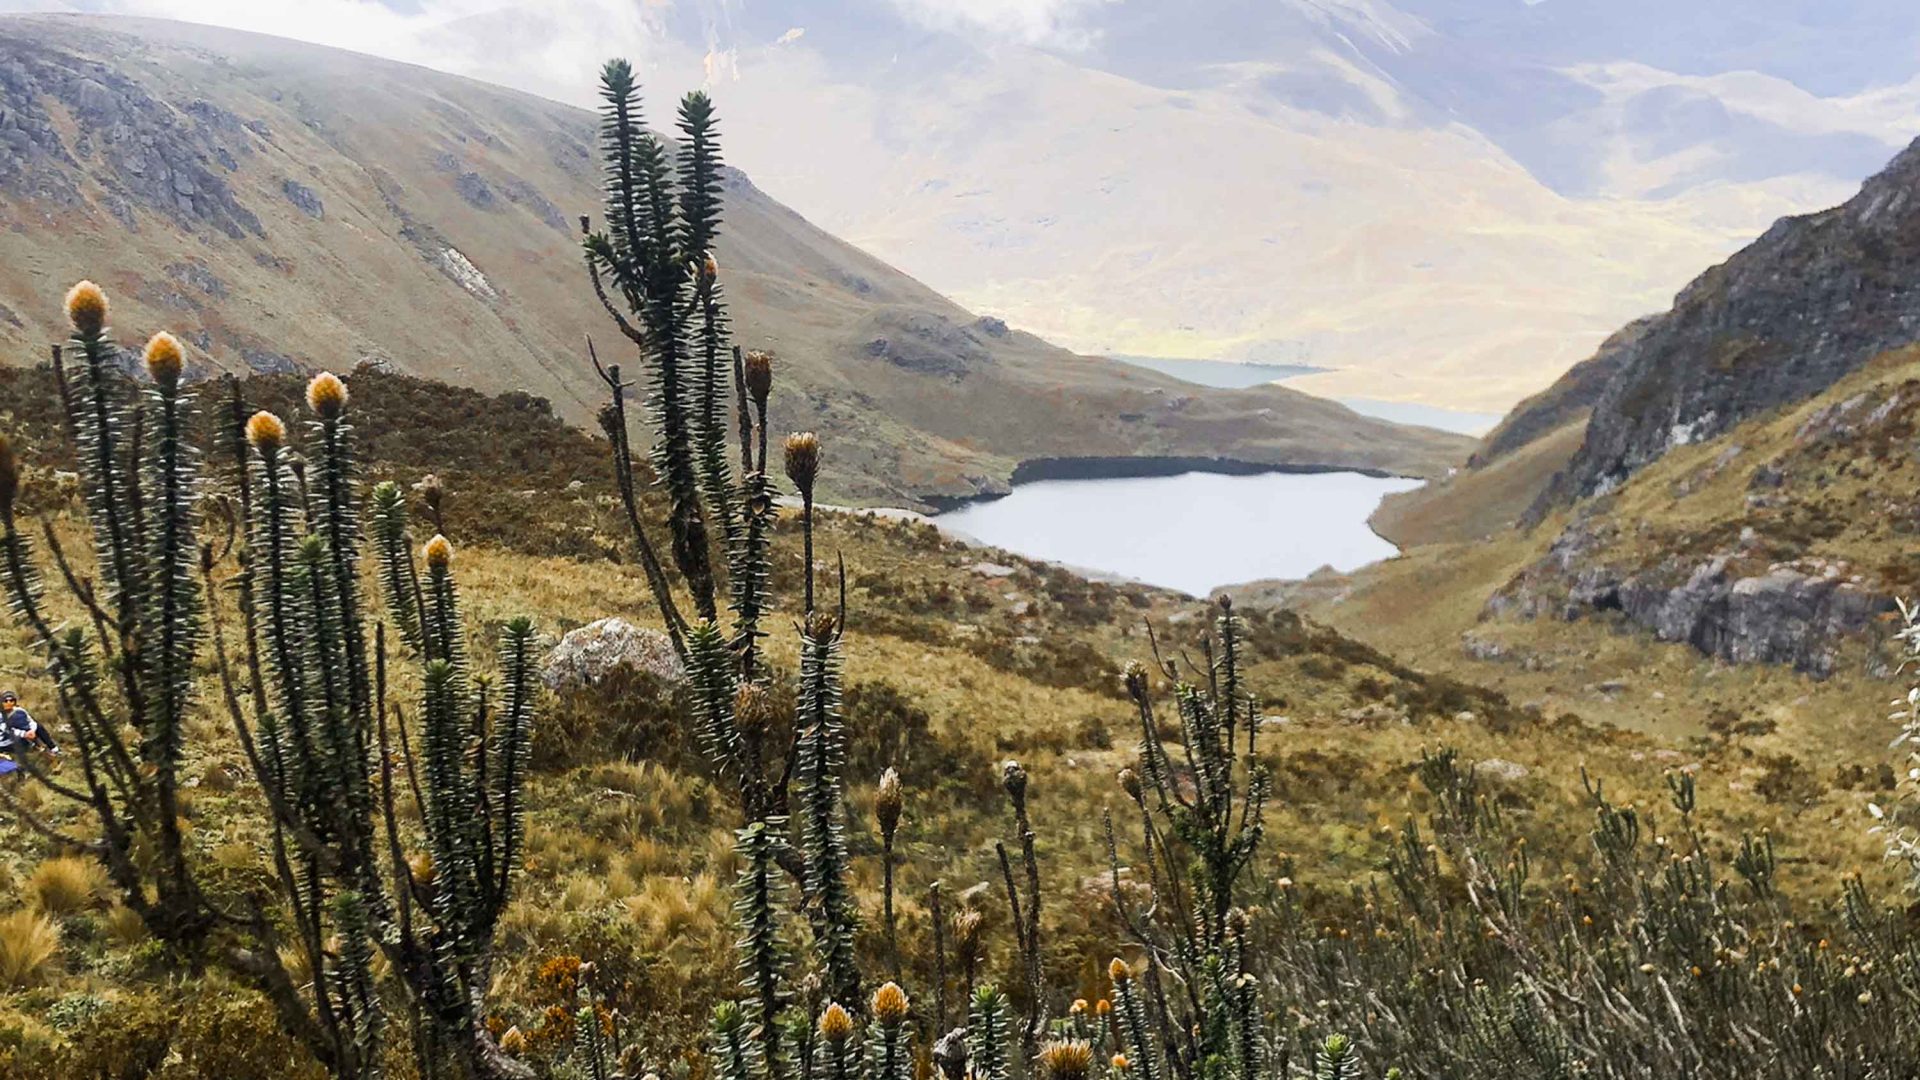 Flower power: Lessons in resilience and climate change from Ecuador’s toughest wildflower